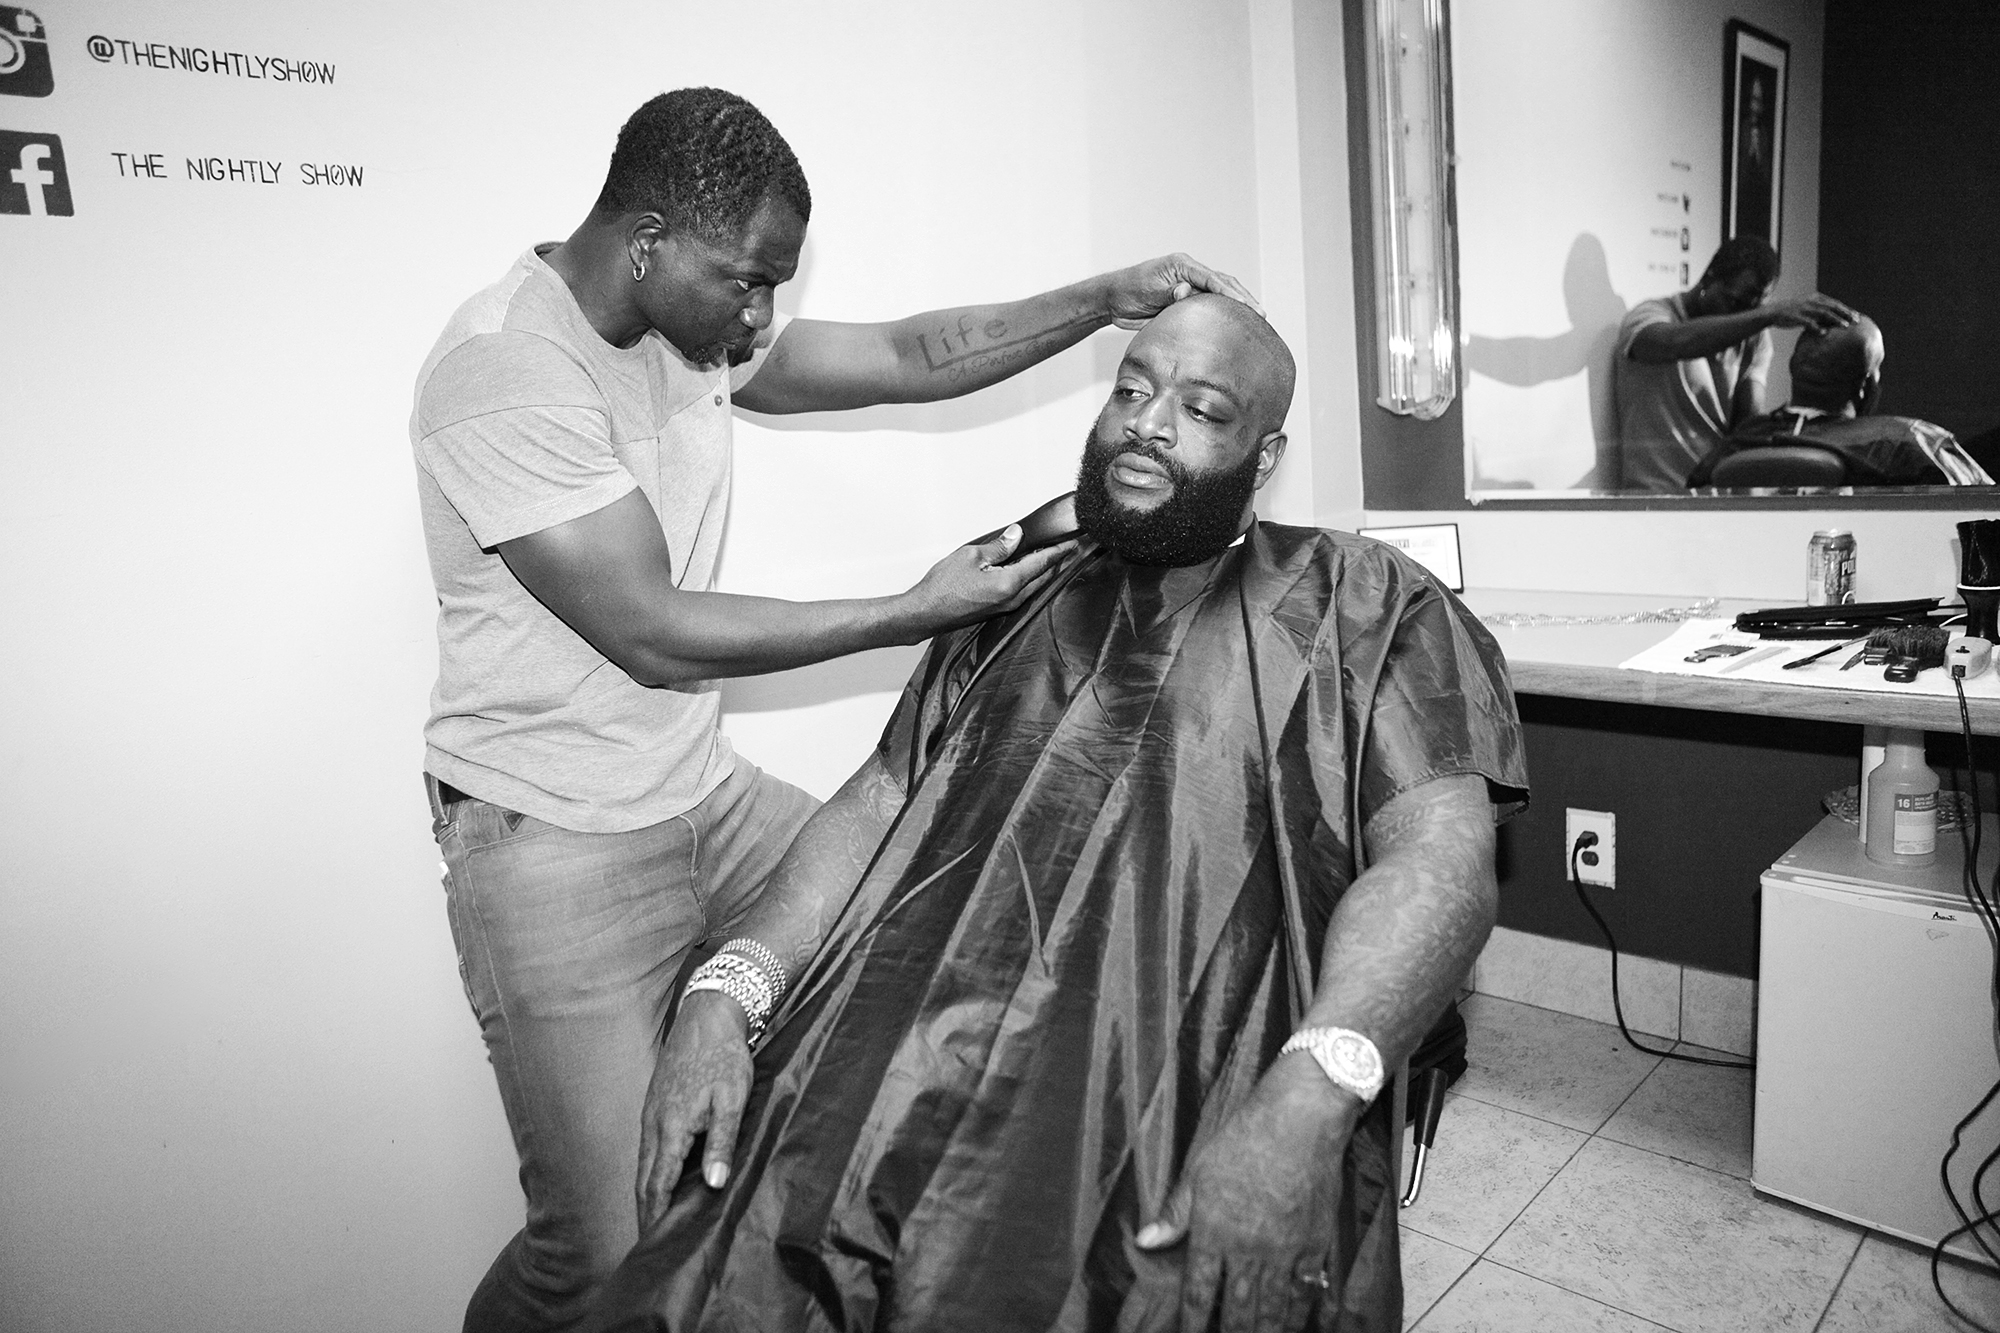 From left: Barber Peter Graham and Rick Ross backstage at The Nightly Show with Larry Wilmore on Nov. 12, 2015 in New York City.